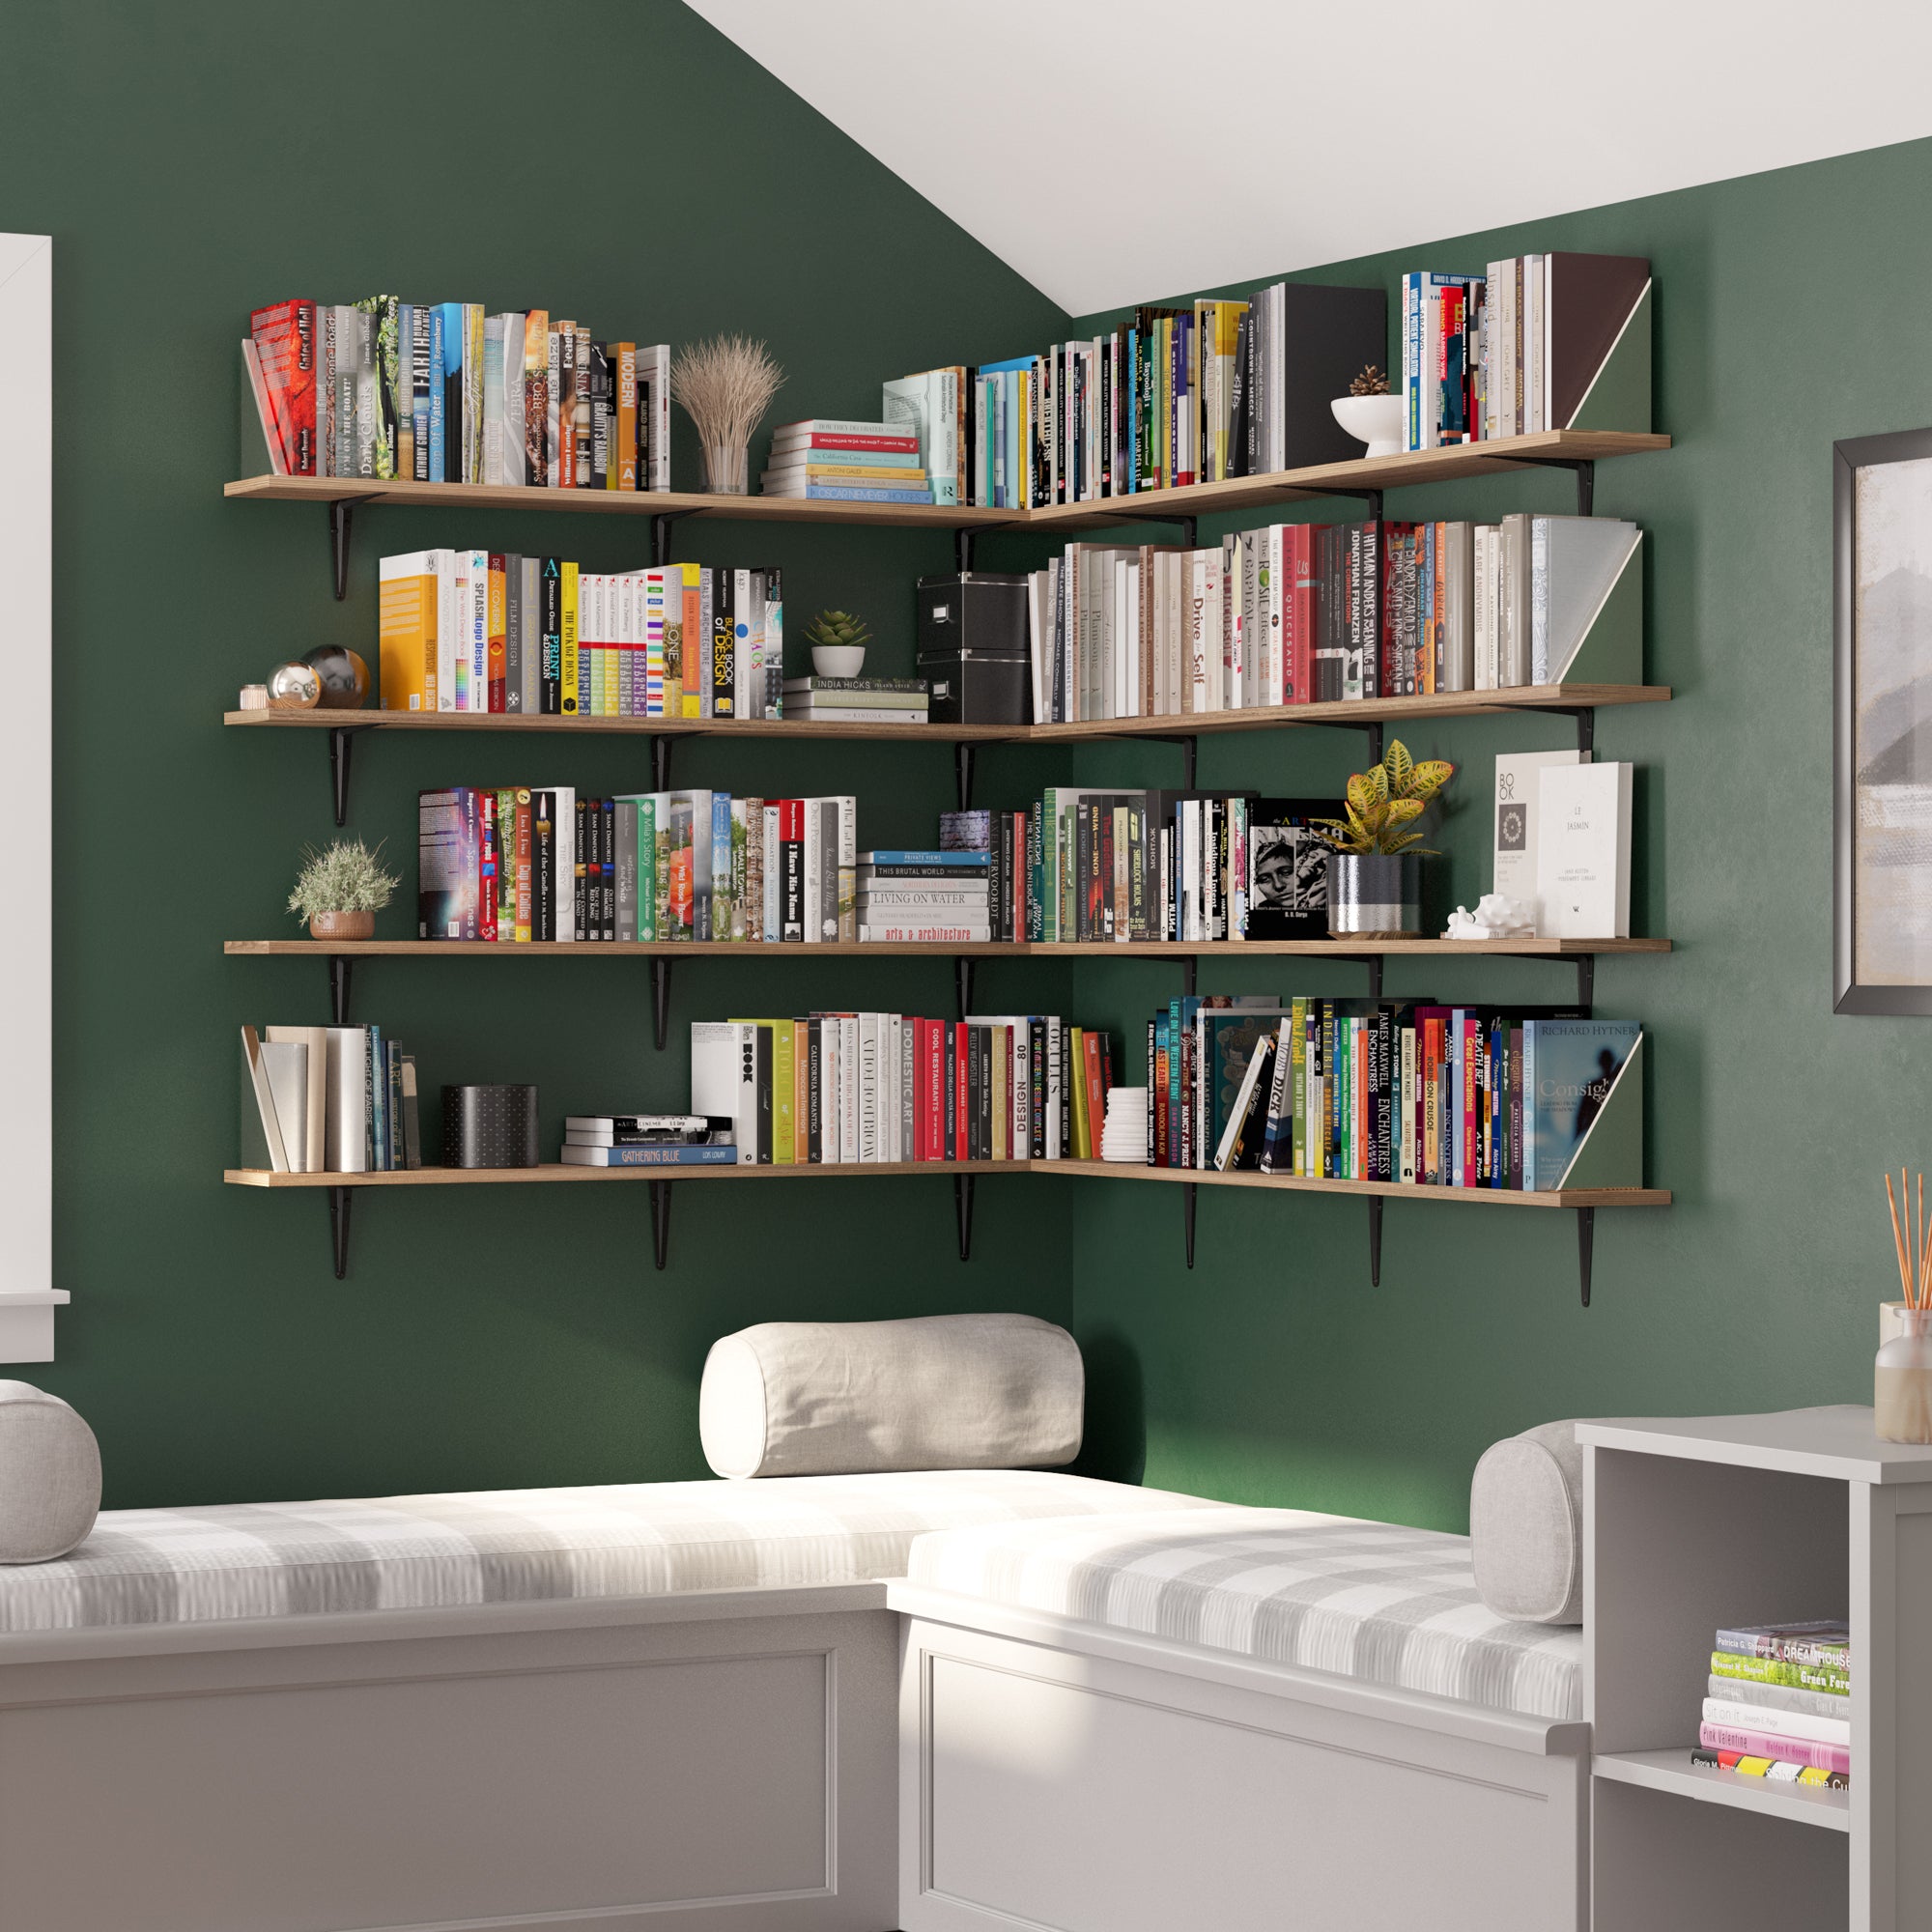 Extensive arrangement of floating shelves filled with a vibrant collection of books in a green-walled room.